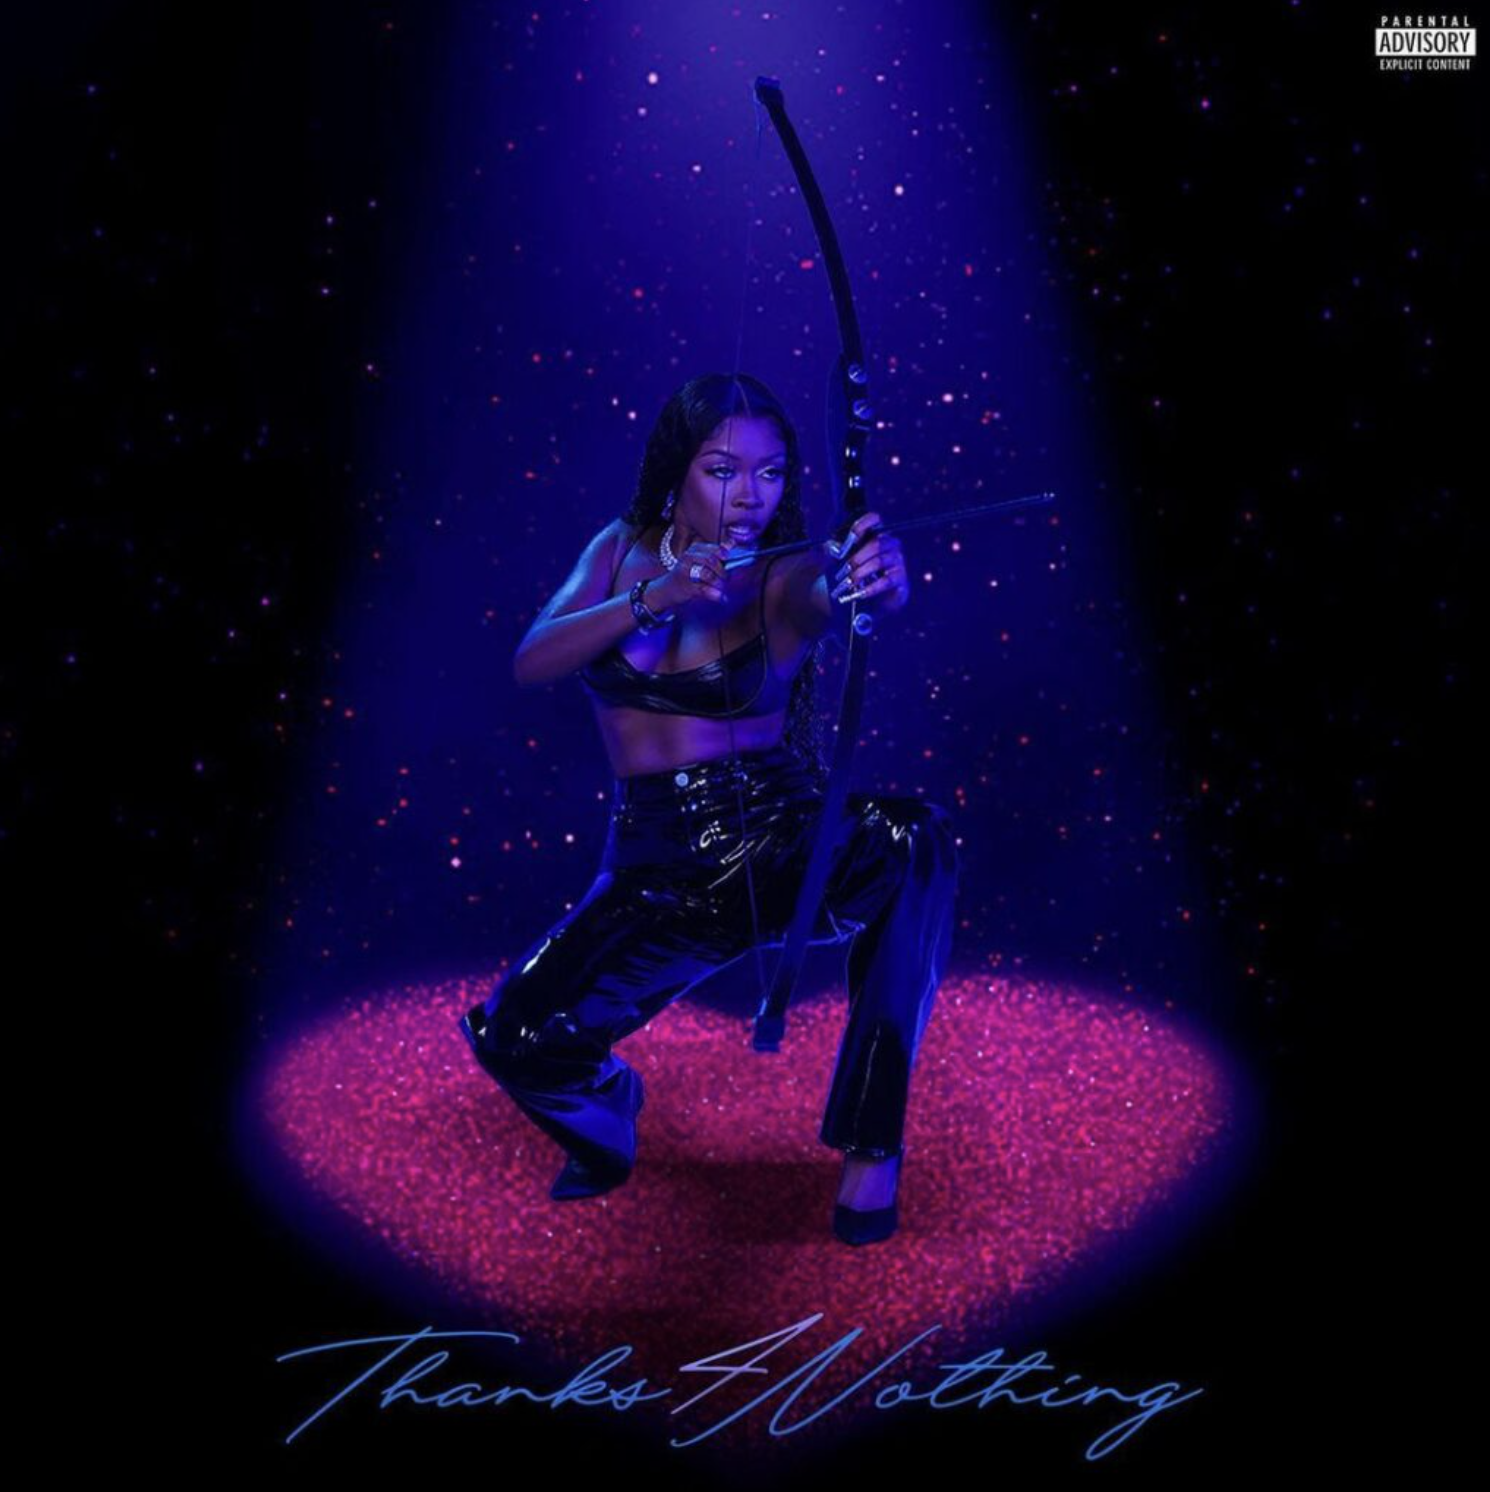 Tink Collabs With Yung Bleu & Ty Dolla $ign On “Thanks 4 Nothing” Album